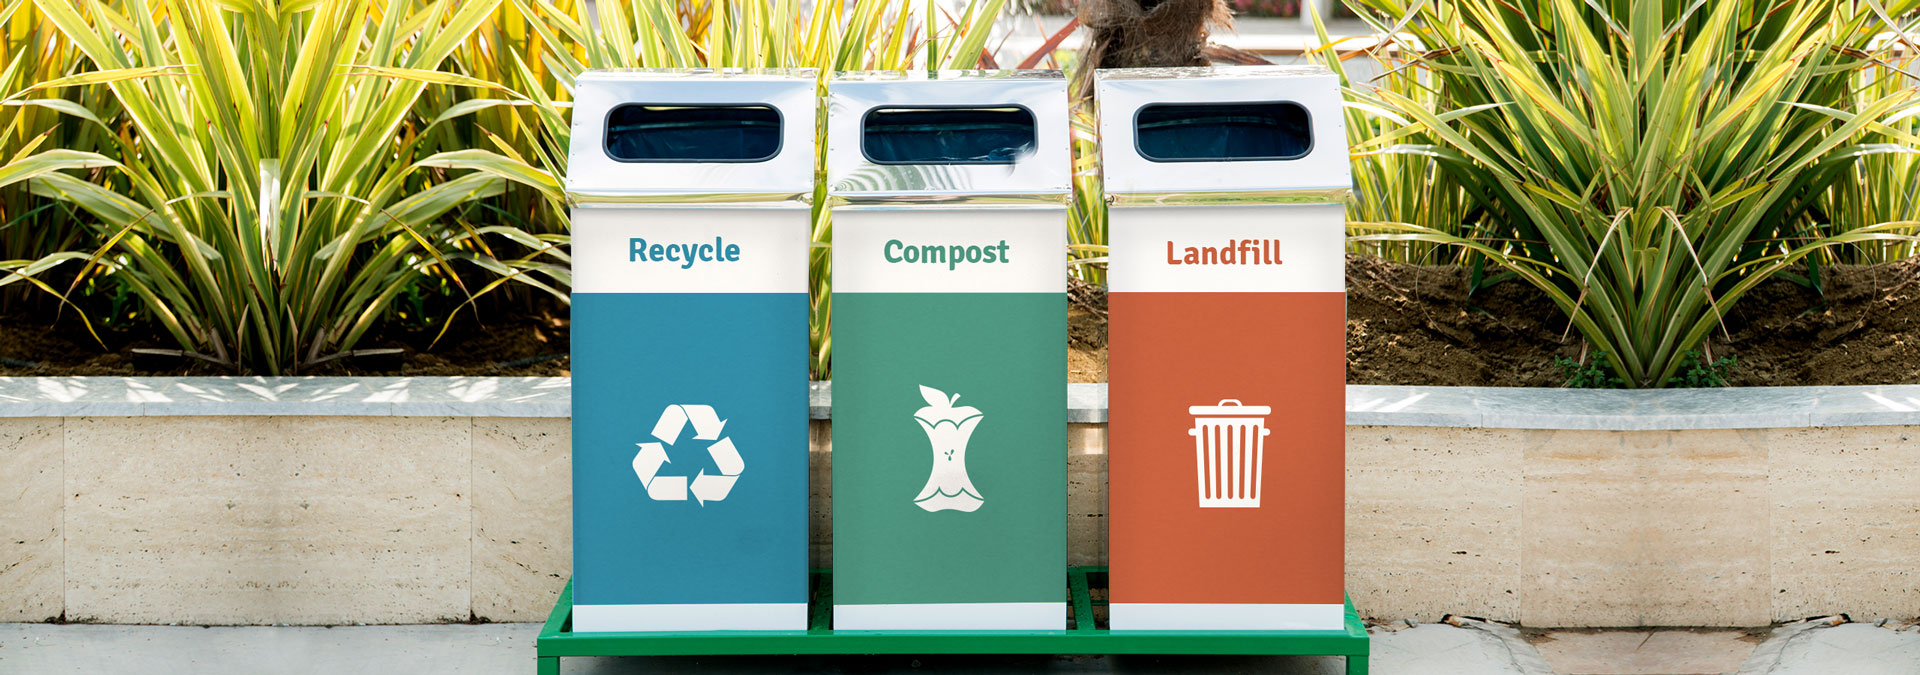 recycling bin designs recycle, compost, landfill